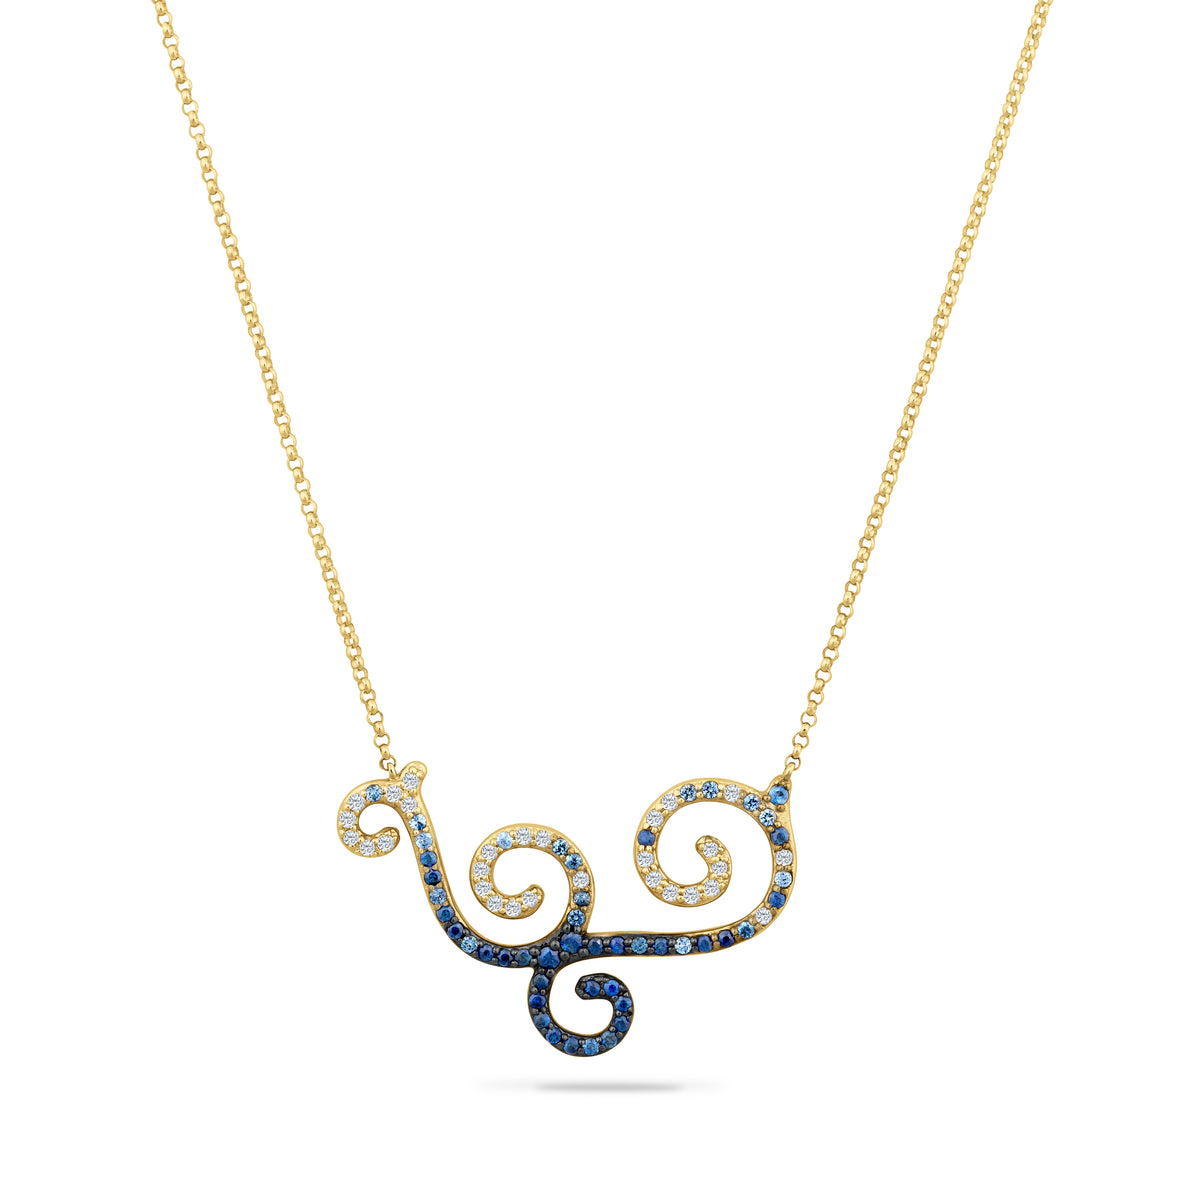 14K WAVE NECKLACE WITH DIAMONDS & SAPPHIRES